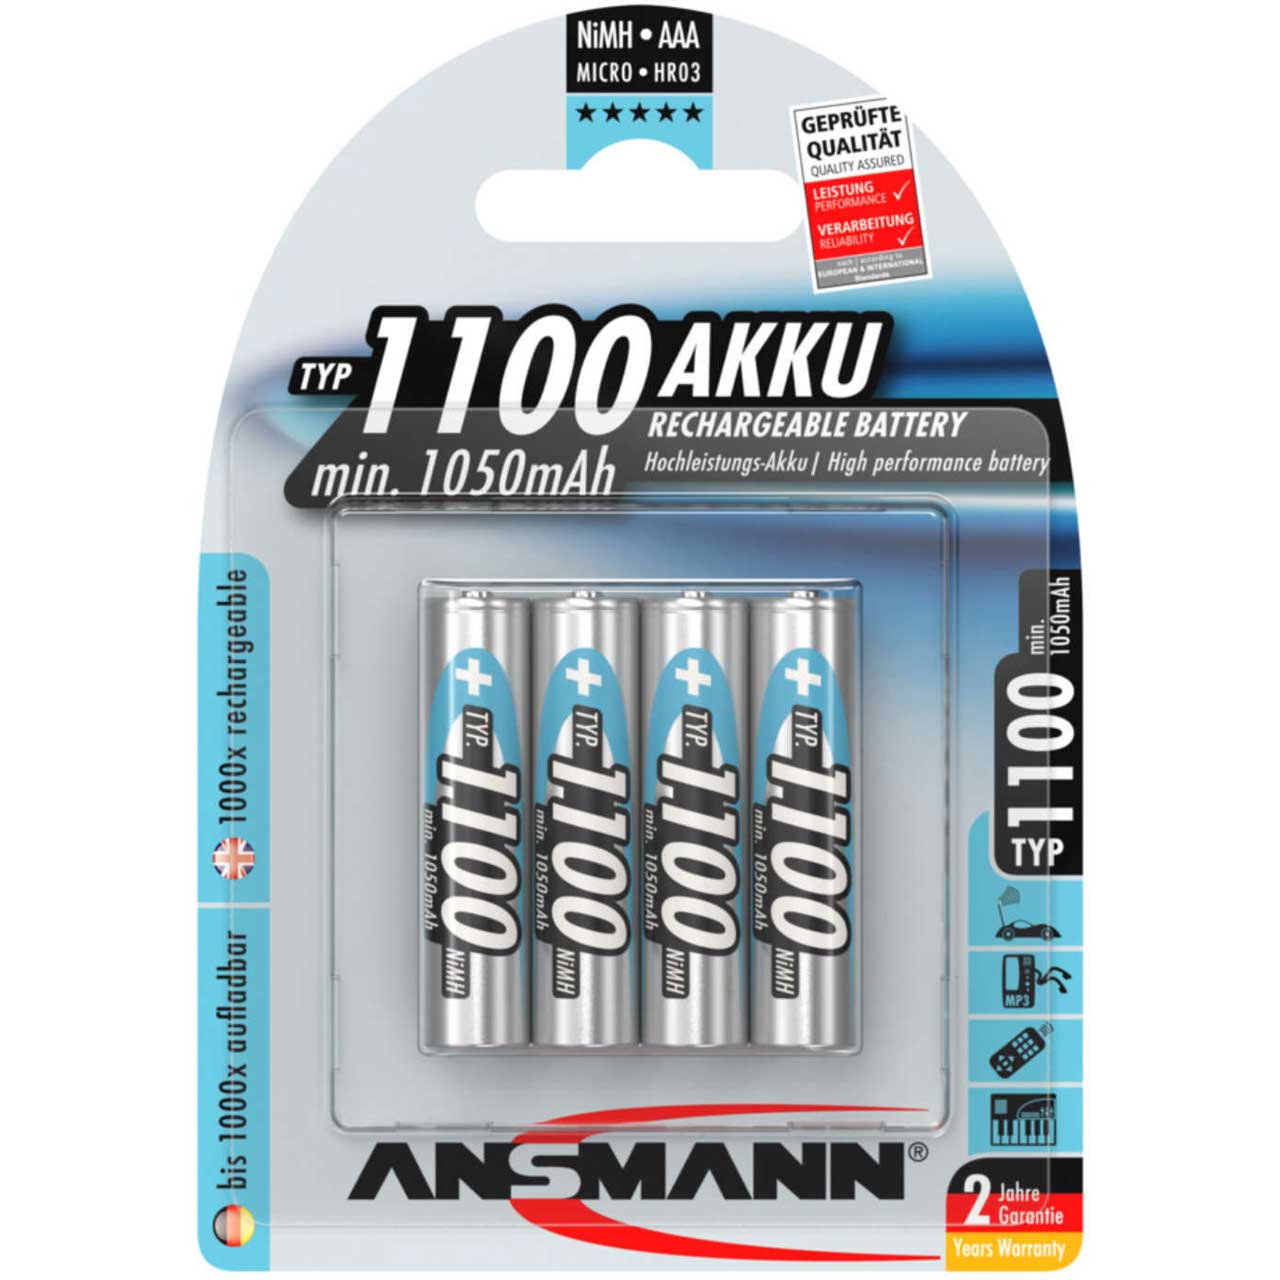 Pack of 4 High Capacity NiMH Rechargeable AAA Batteries